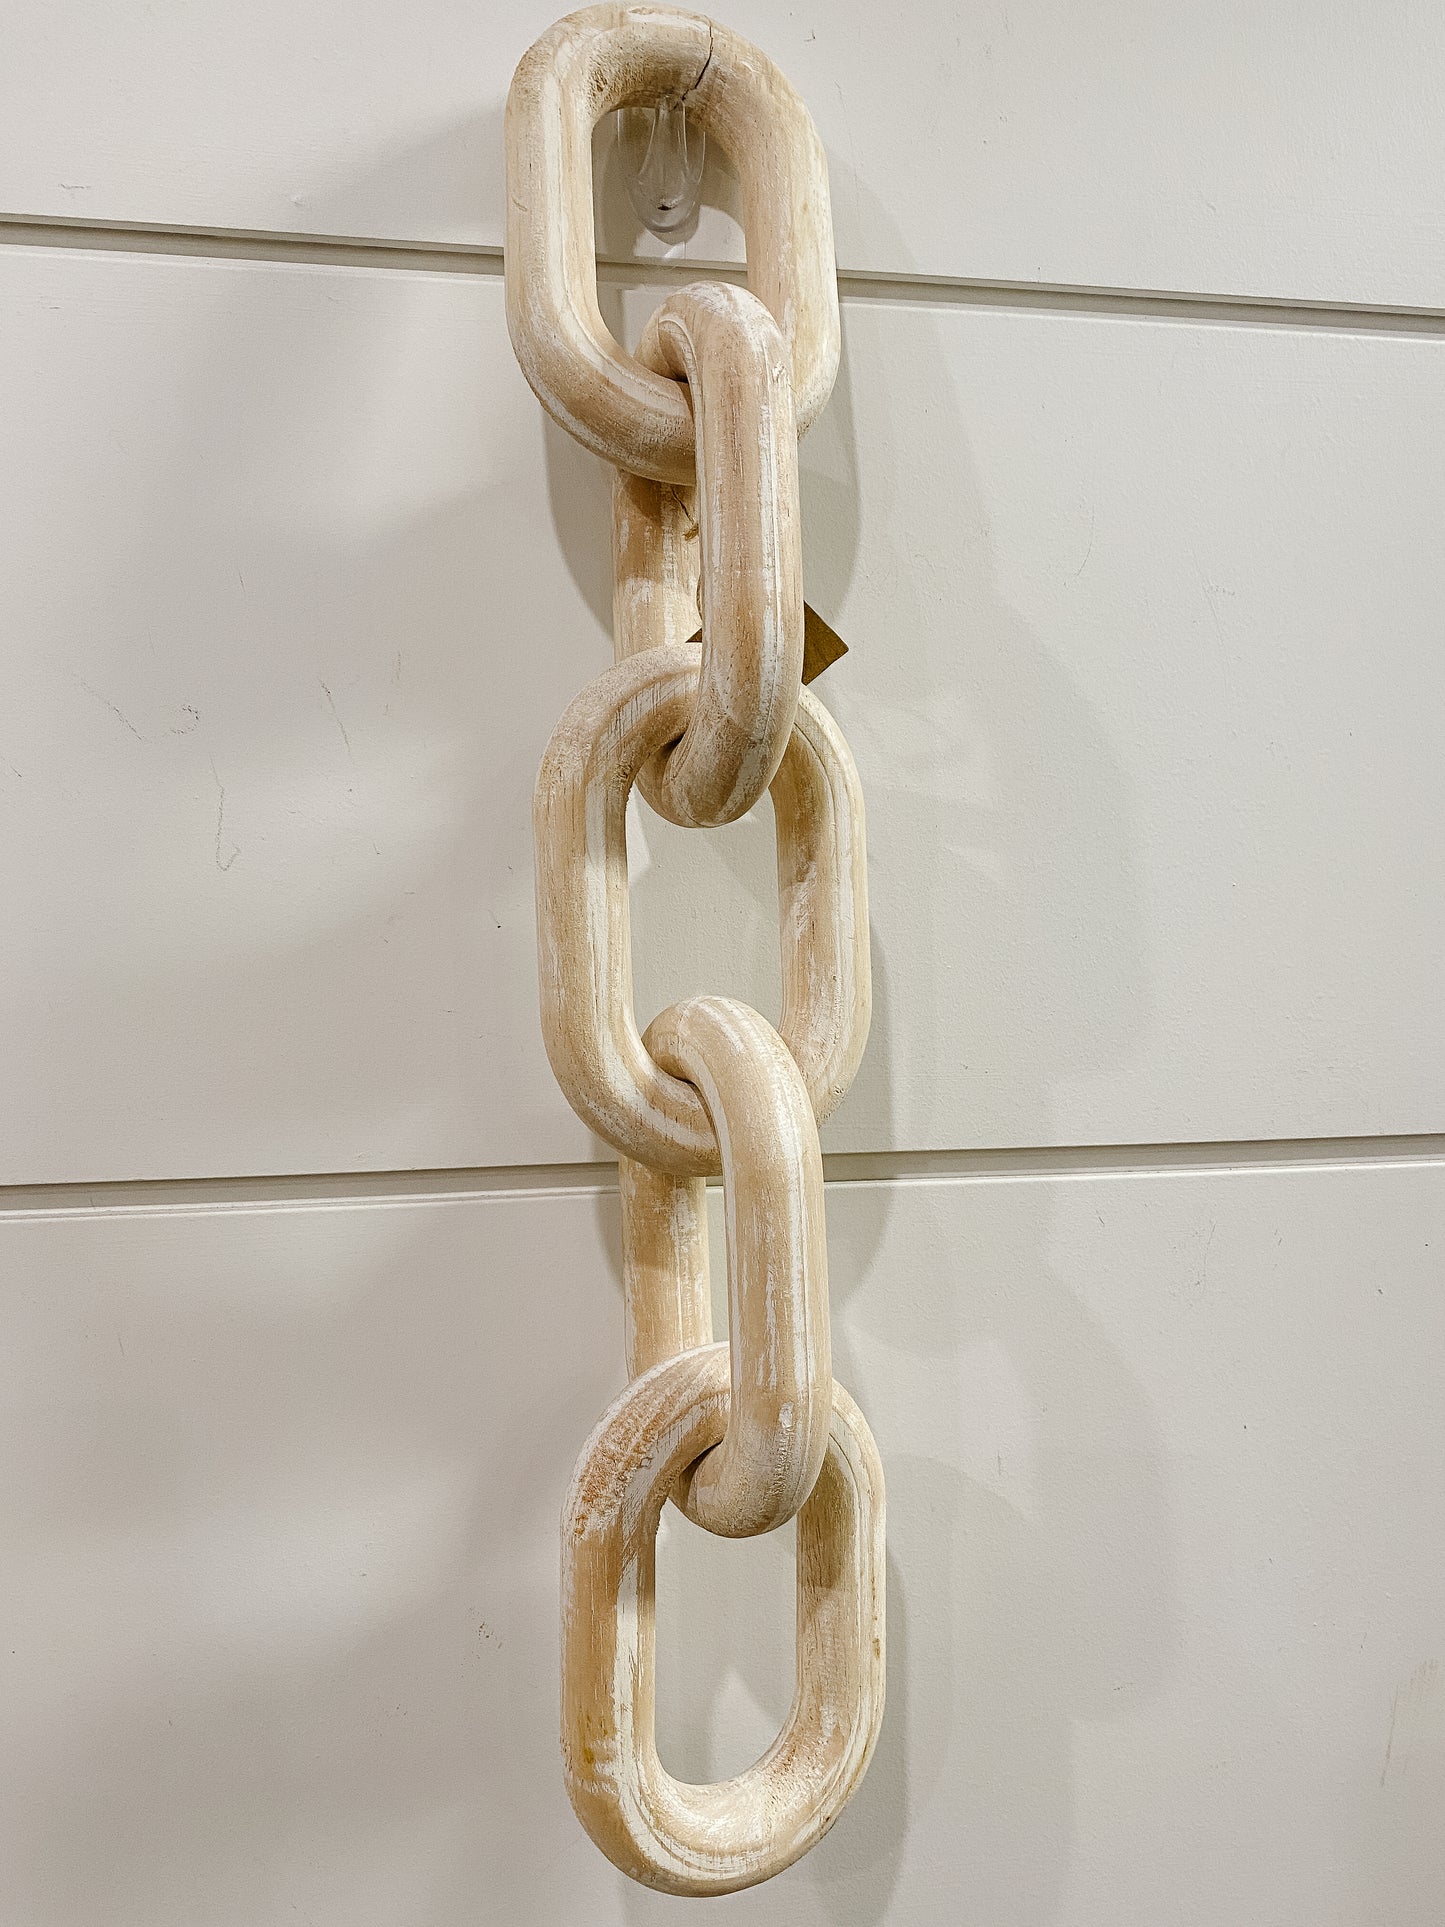 Natural Wooden Linked Ring Decor